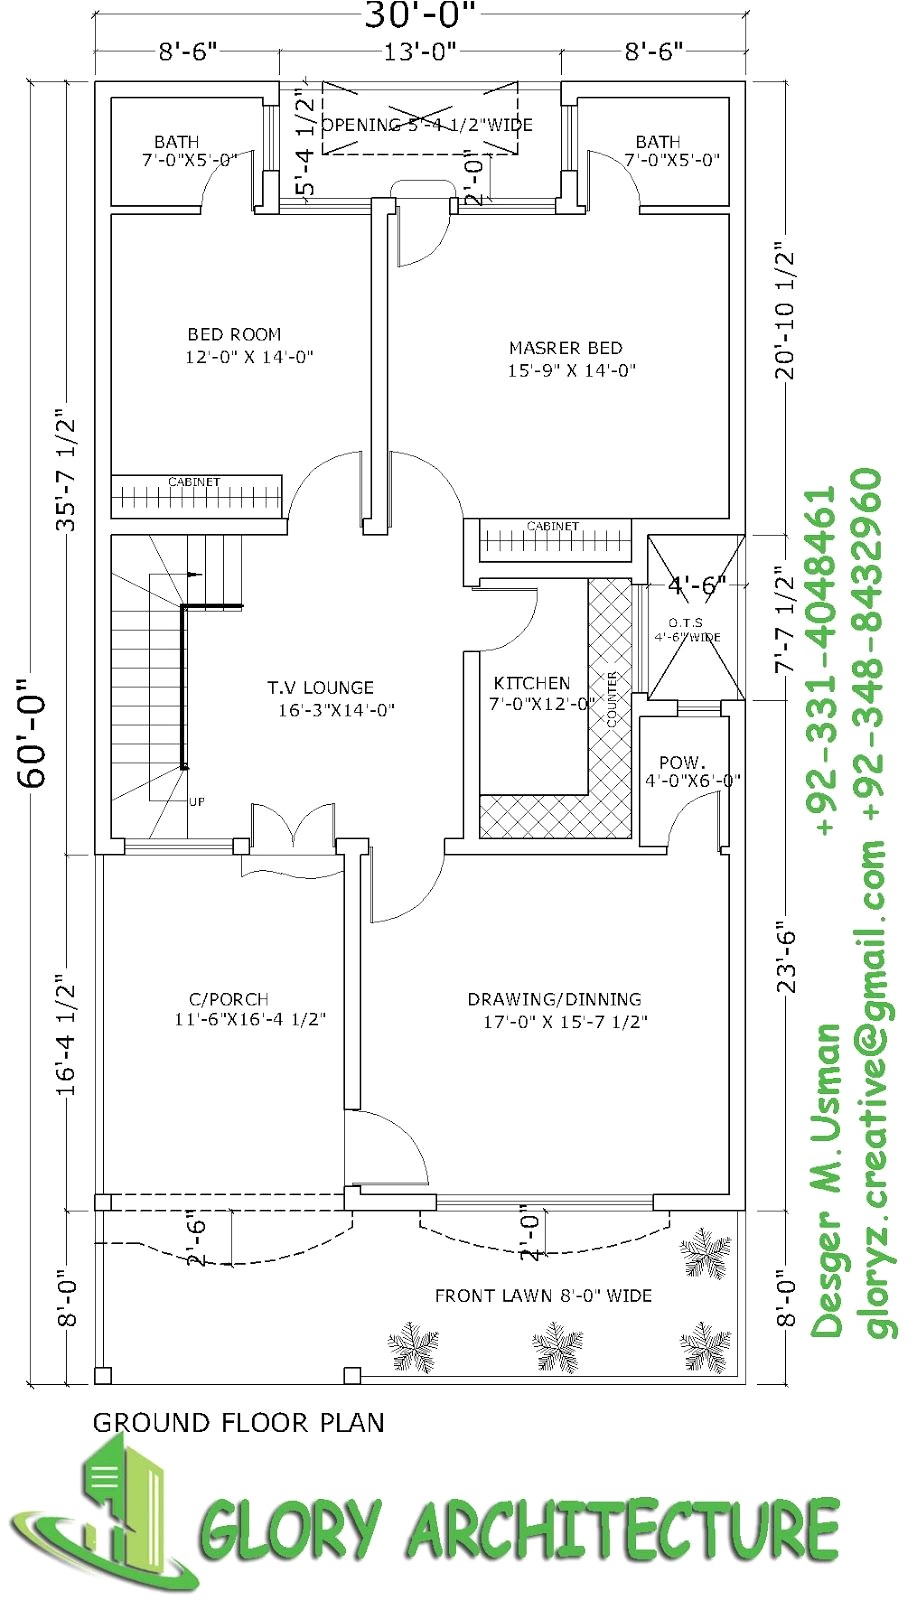 energy independent home plans